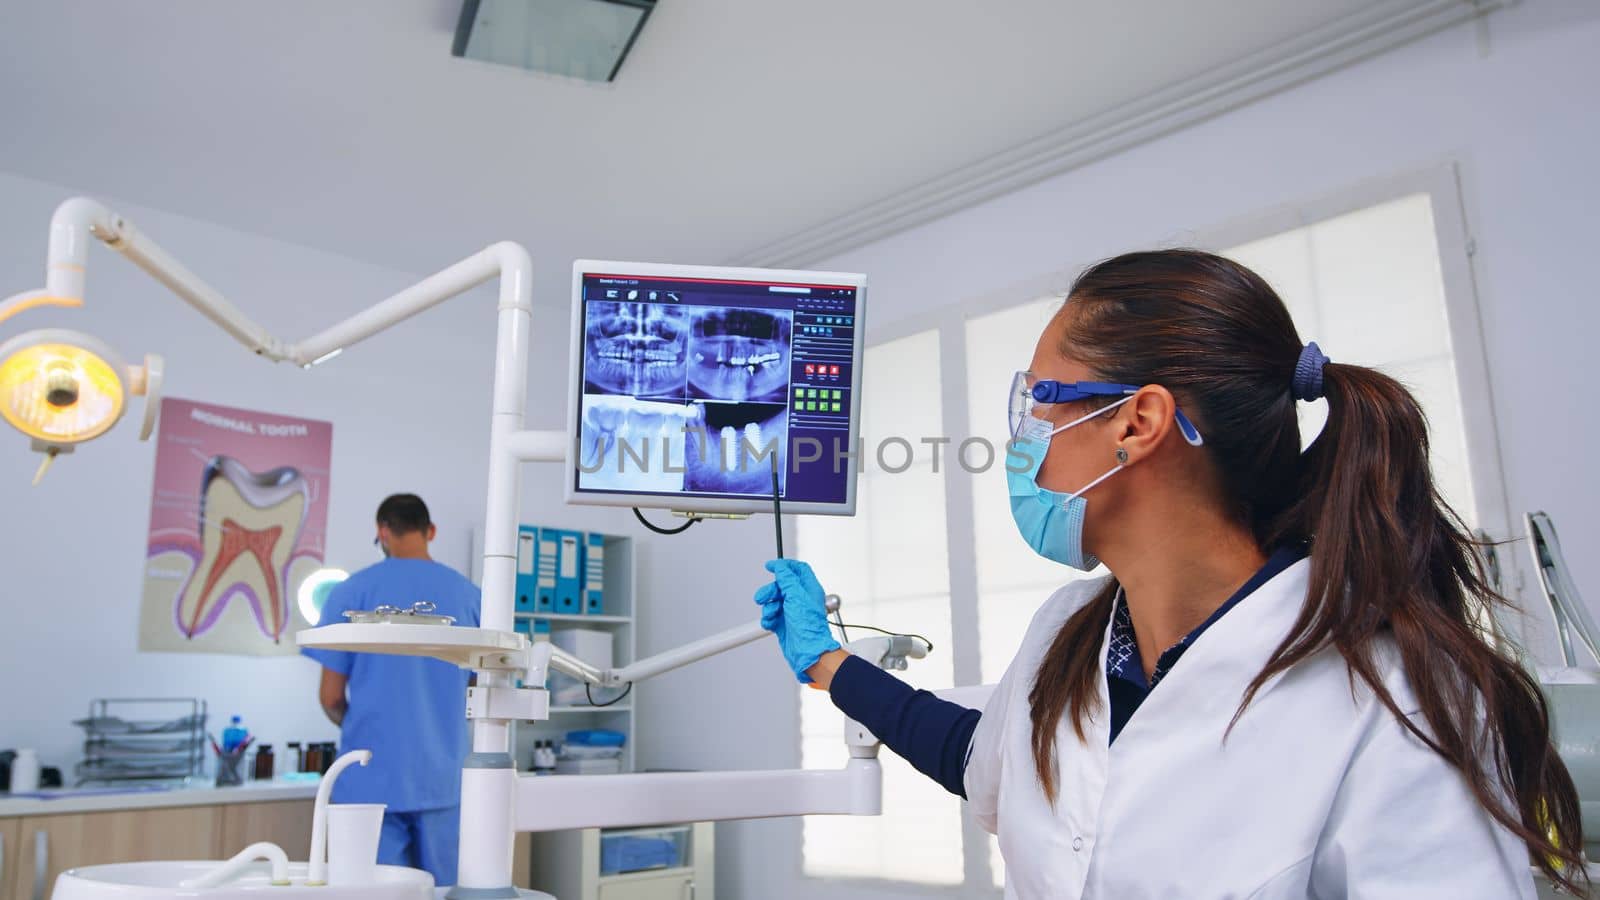 Dentistry doctor talking about surgery showing x-ray on monitor by DCStudio